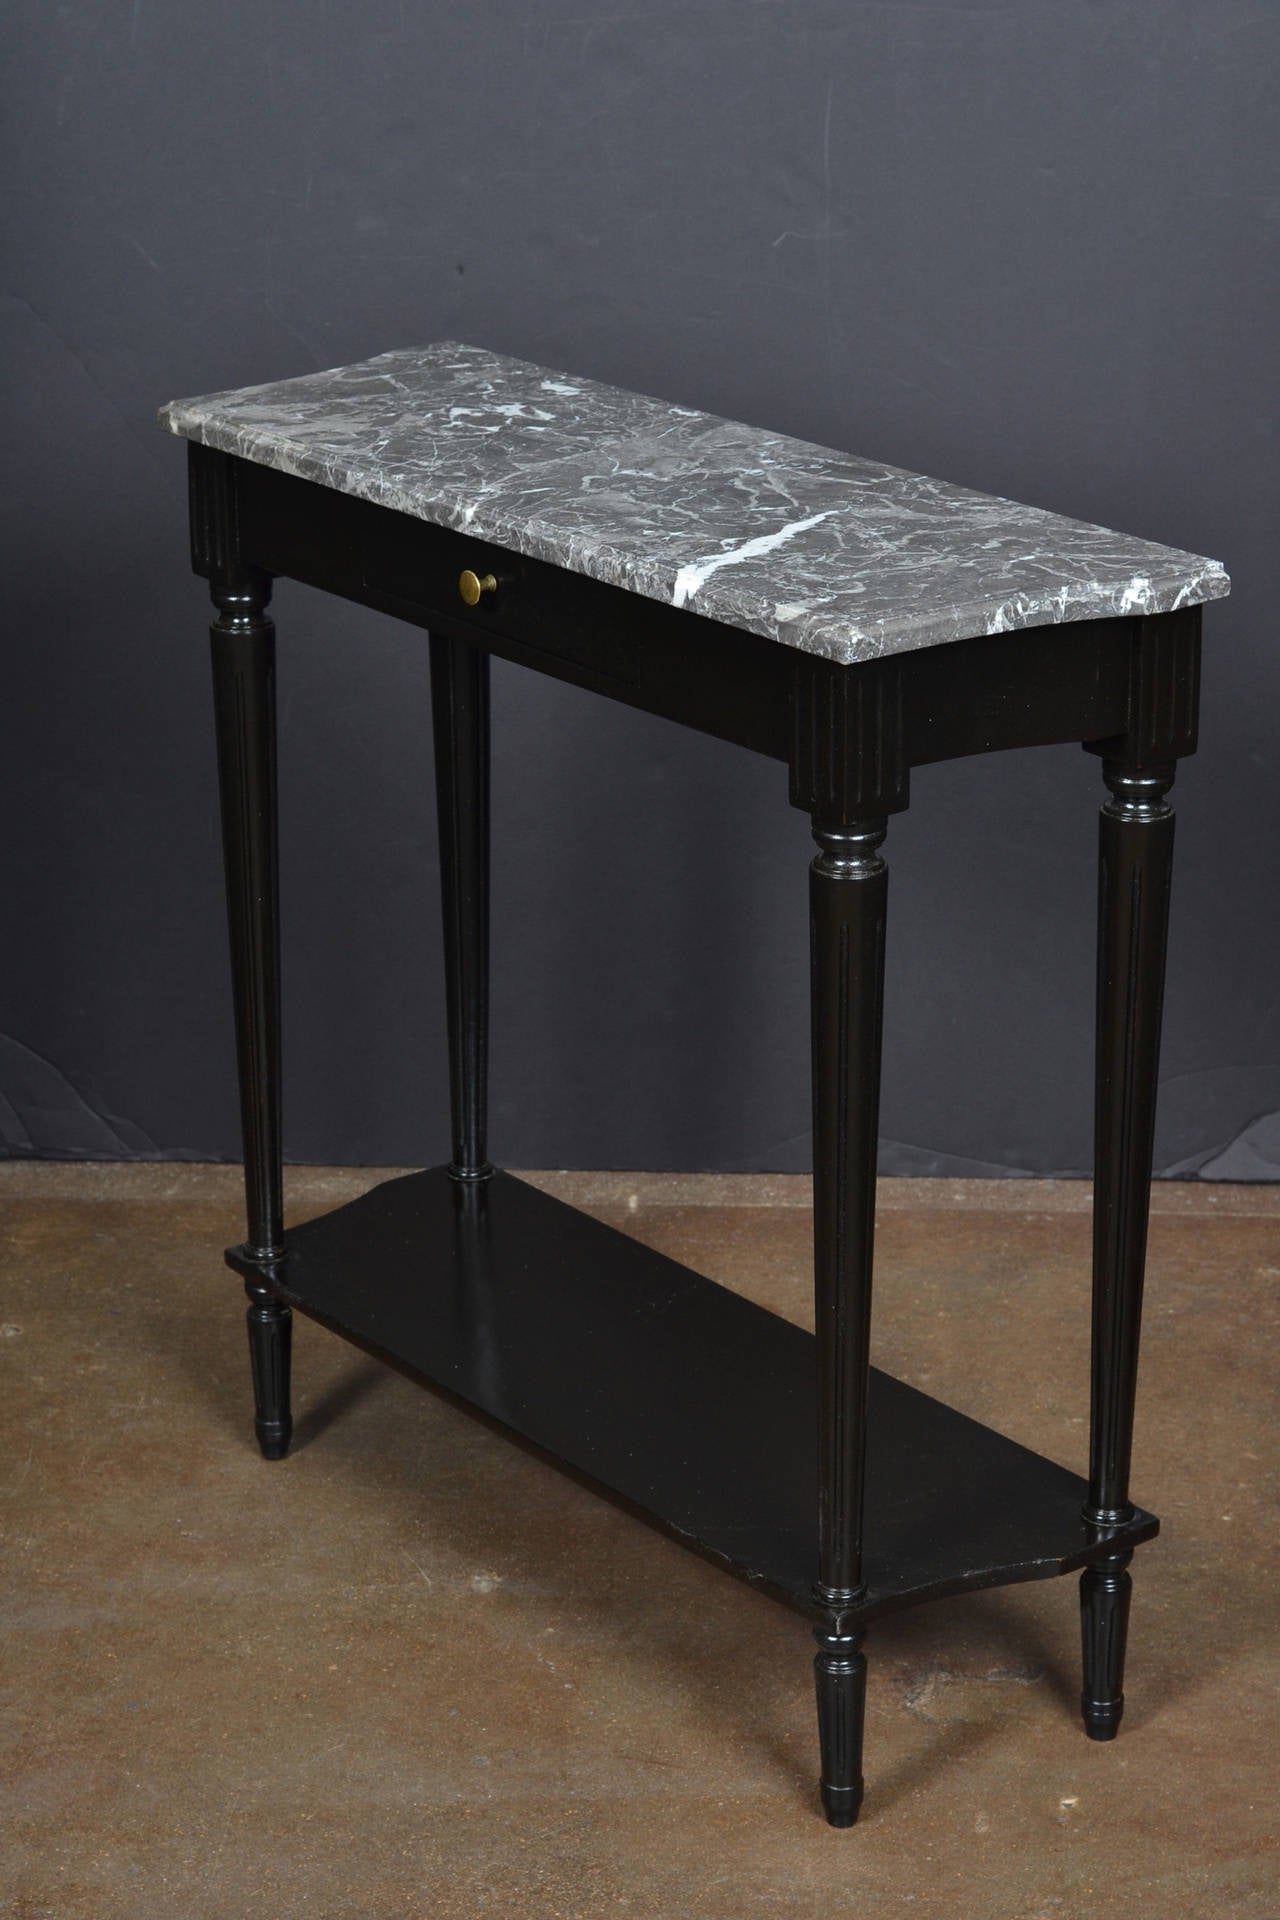 French Louis XVI style console table, ebonized with a lustrous French polish finish, topped with Saint Anne marble. A single dovetailed drawer has a brass pull, plus a bottom shelf. Elegant, versatile and timeless design.